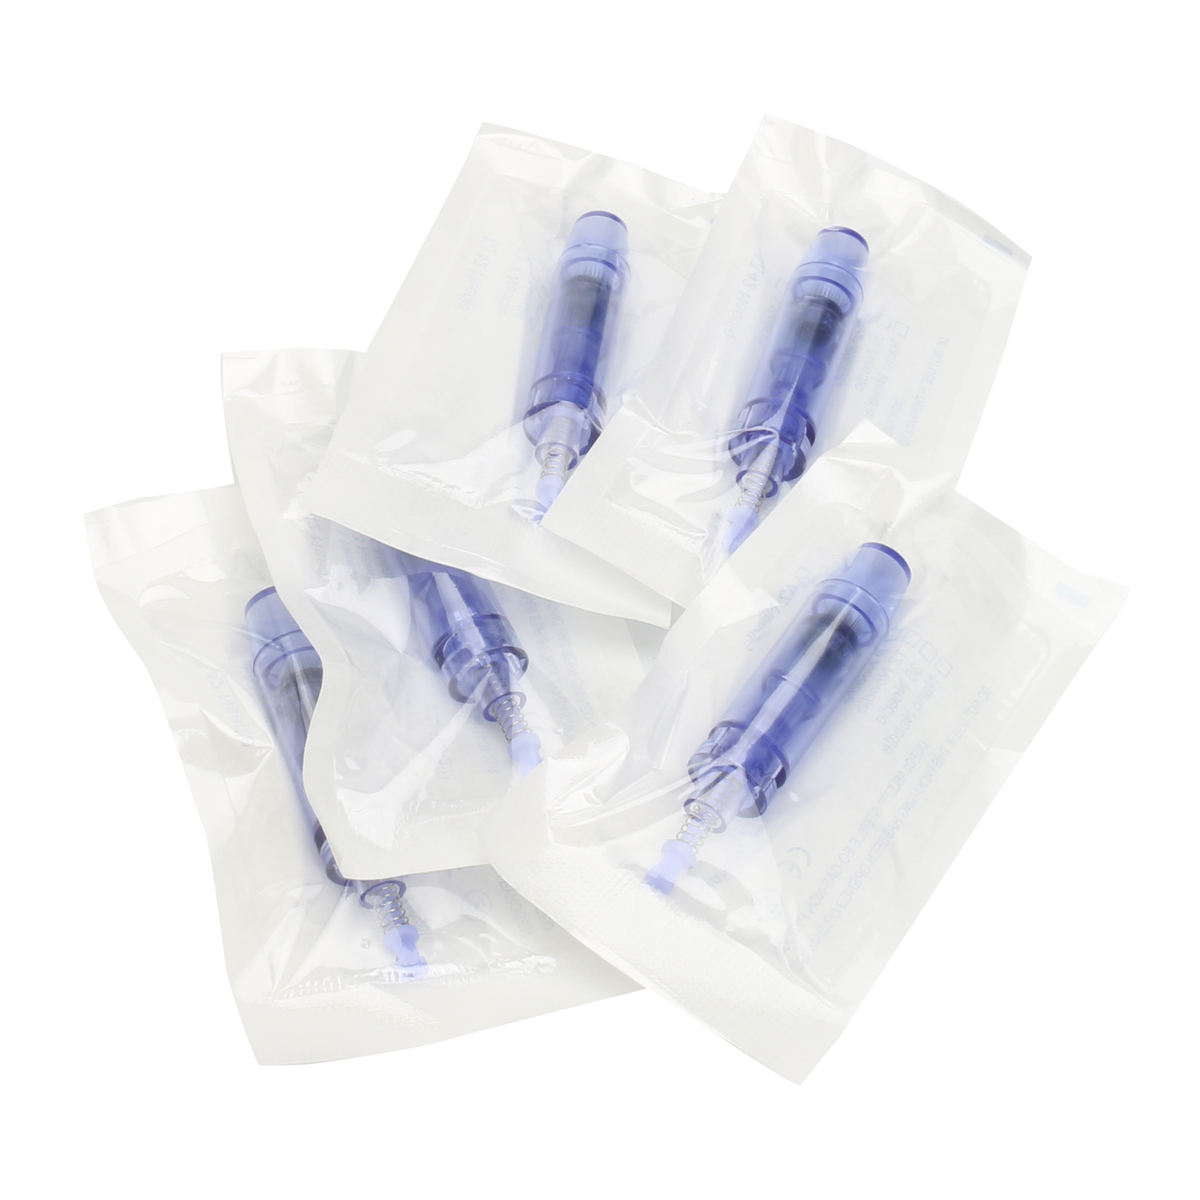 5Pcs-42Pin-Needle-Cartridge-Tip-For-A1-Dr-Pen-Electric-Auto-Micro-Stamp-Derma-Anti-Aging-Pen-1249399